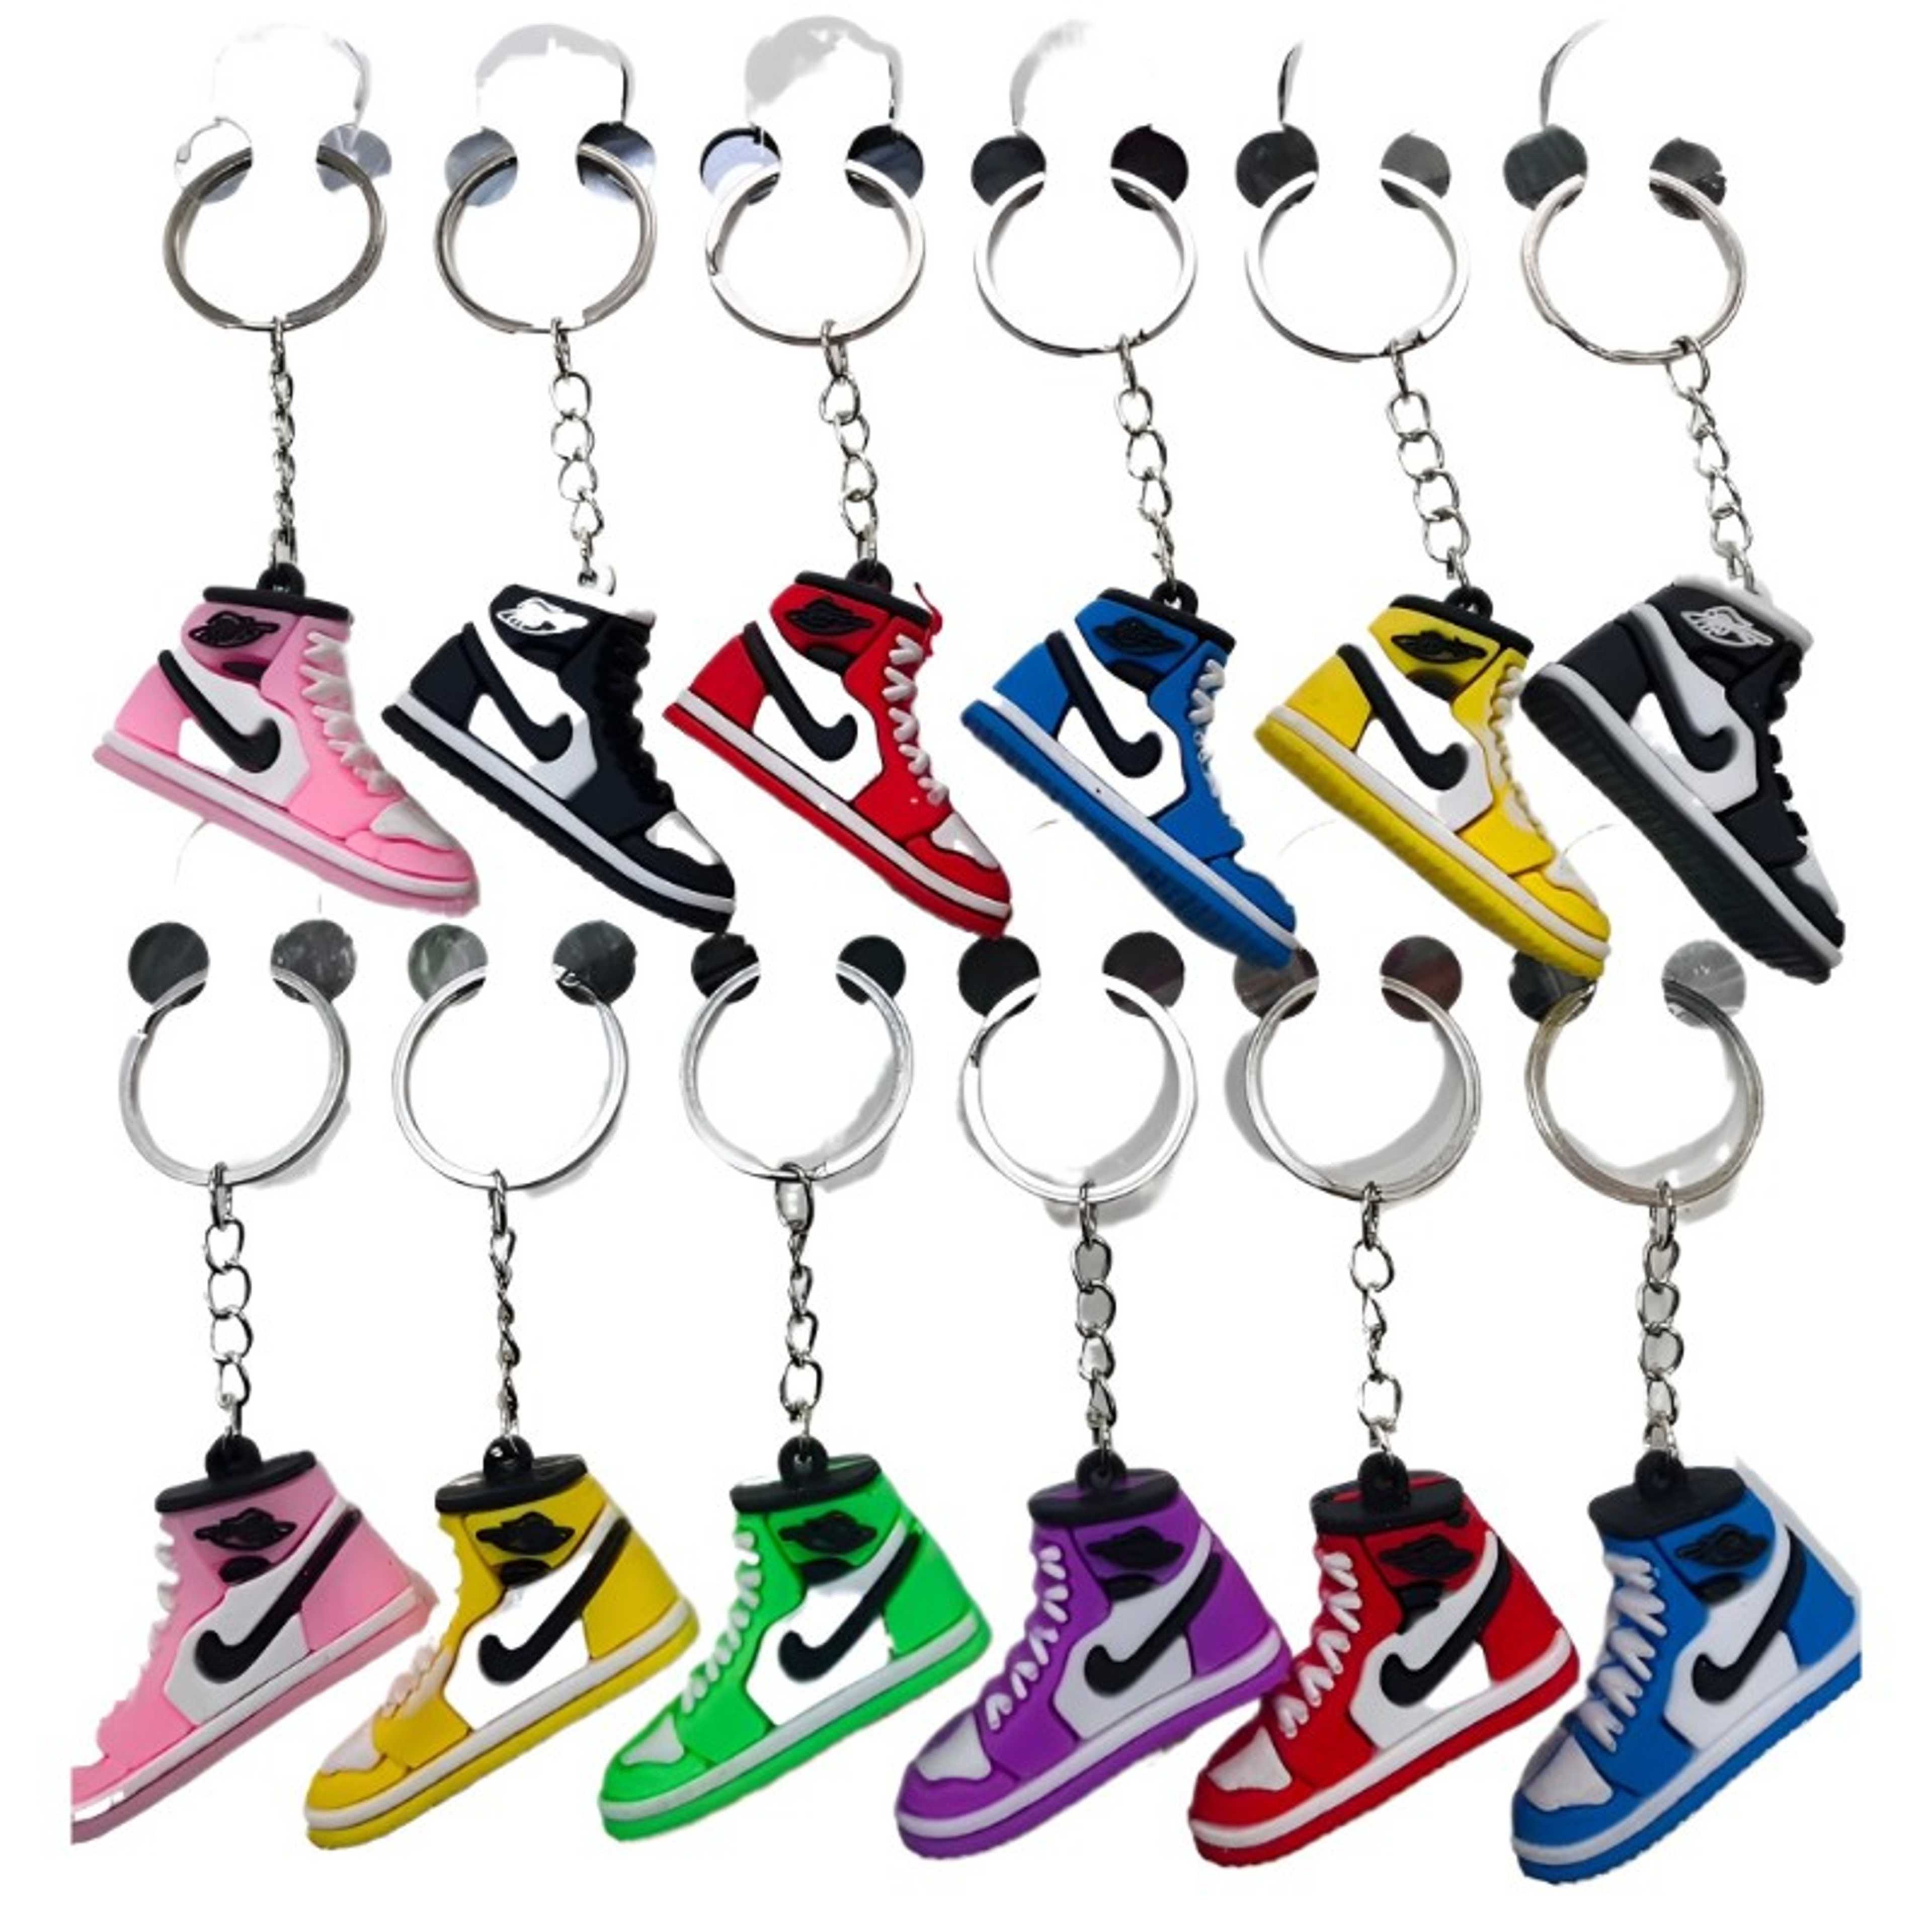 Pack of Two Nikee Shoes Keychain -Random color-Nikee Joggar  Shoe Keychain for Sneaker heads| An eye catching Keyring for Your Car and Bike| Bag Ornaments|A Perfect Organiser for your Valuables